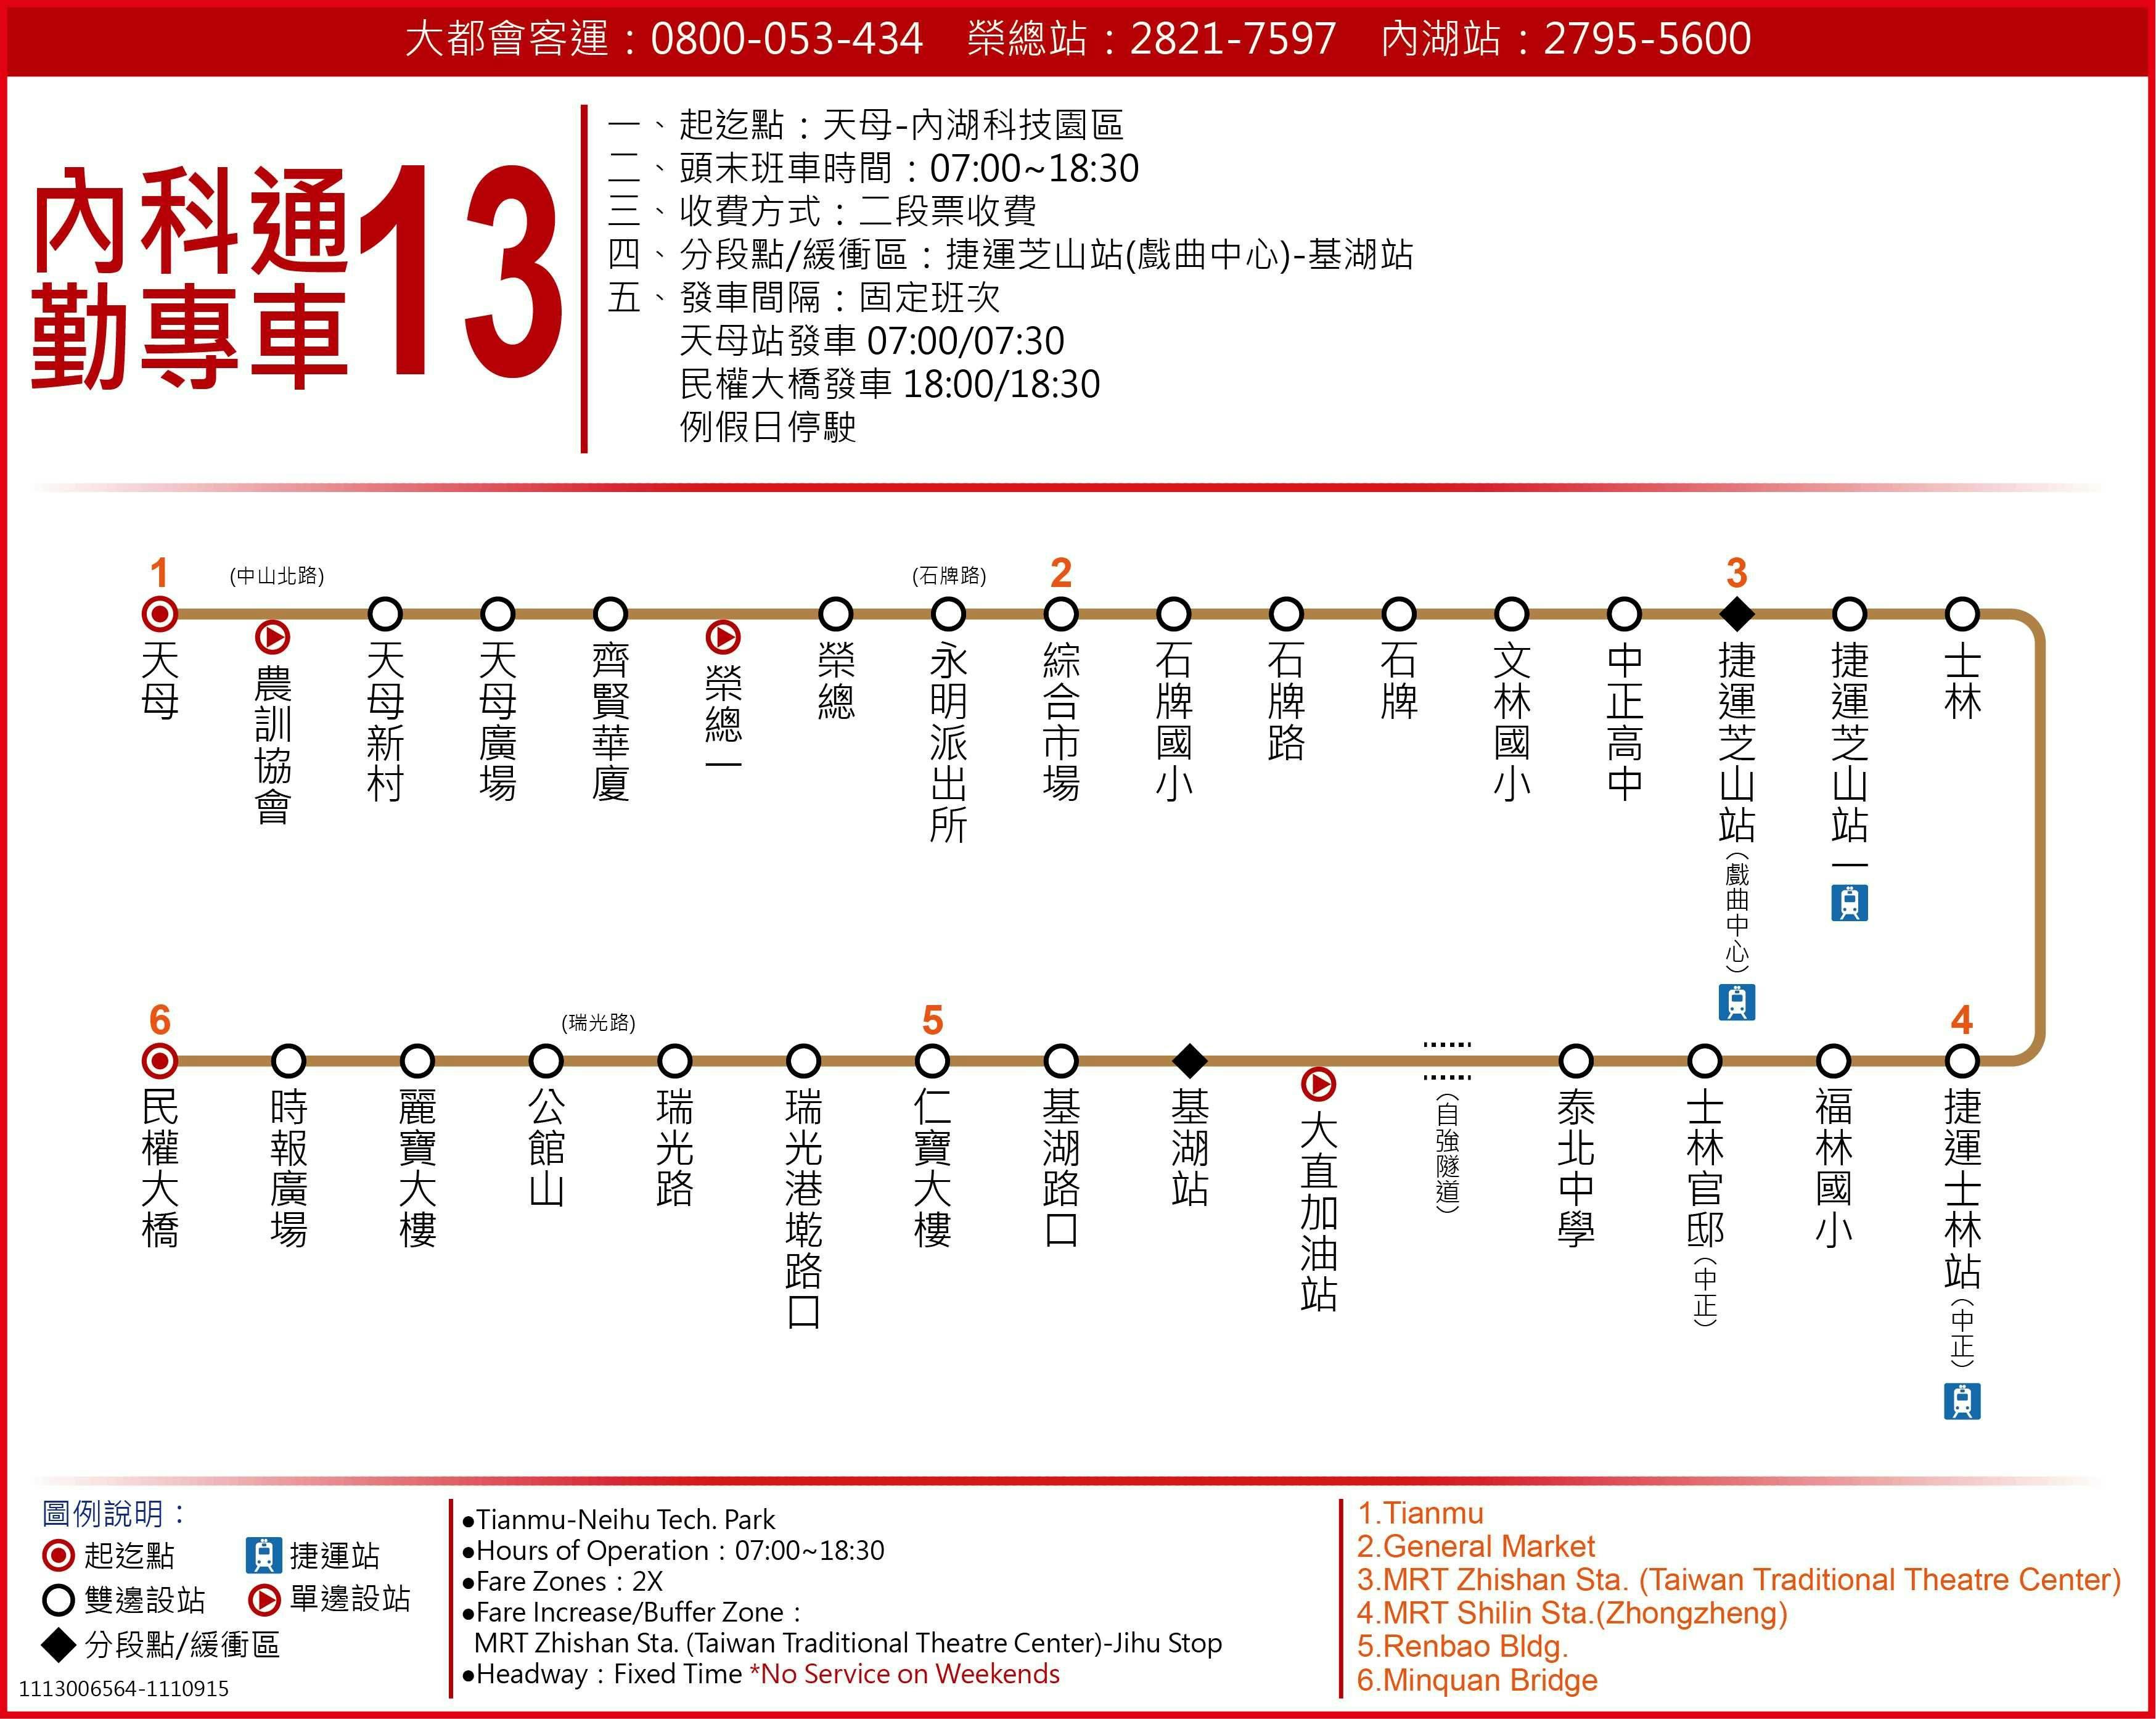 NH13Route Map-台北市 Bus